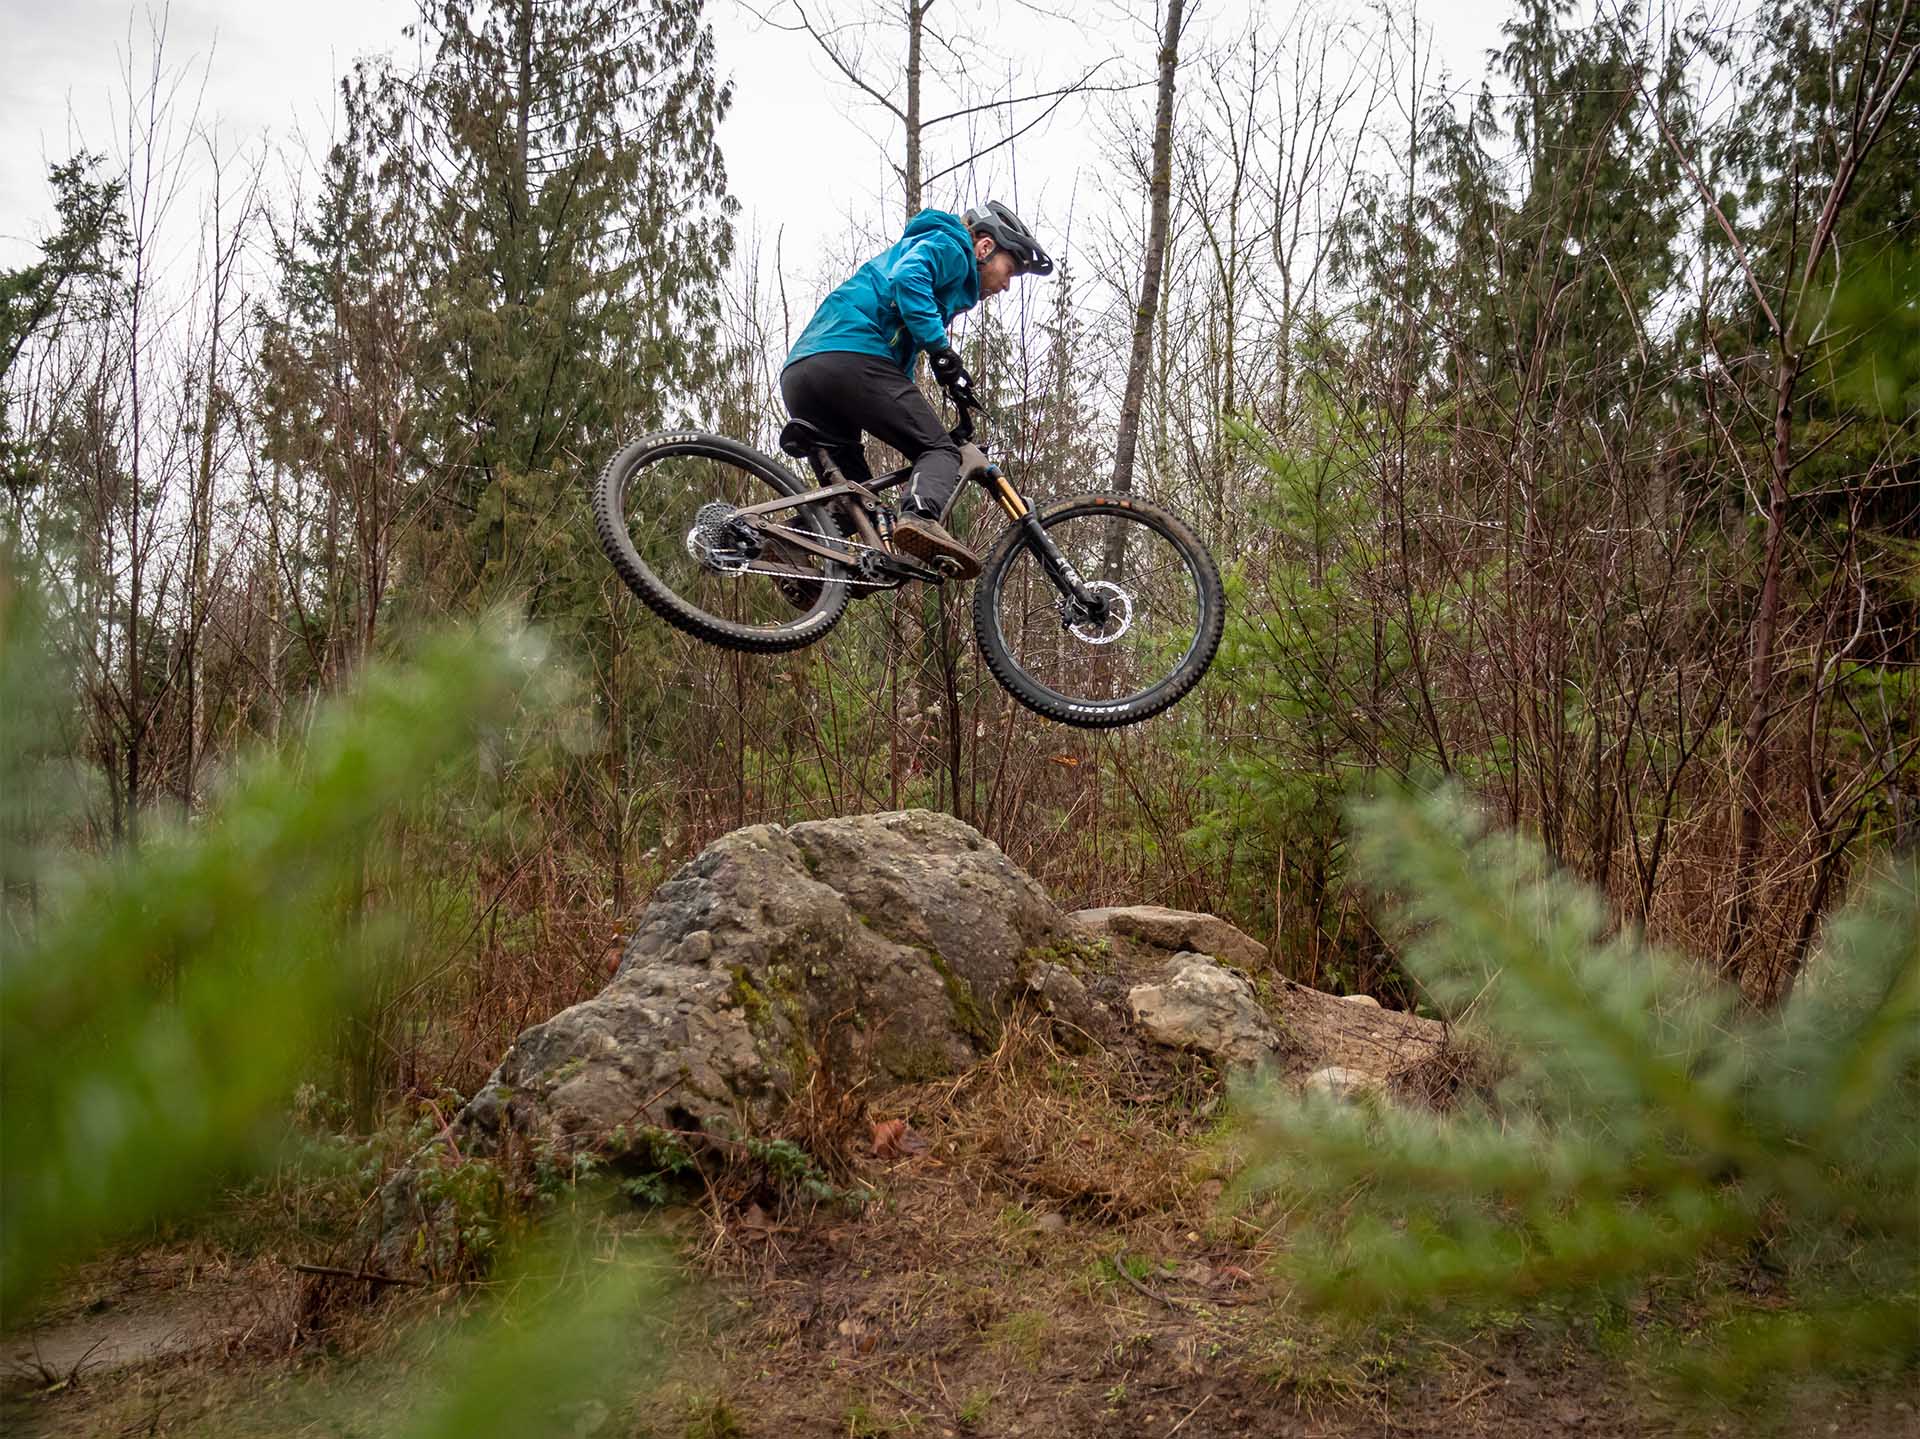 This bike likes to fly so much it’ll get airborne off of downhill rock rolls - going uphill. Rider: Logan Nelson